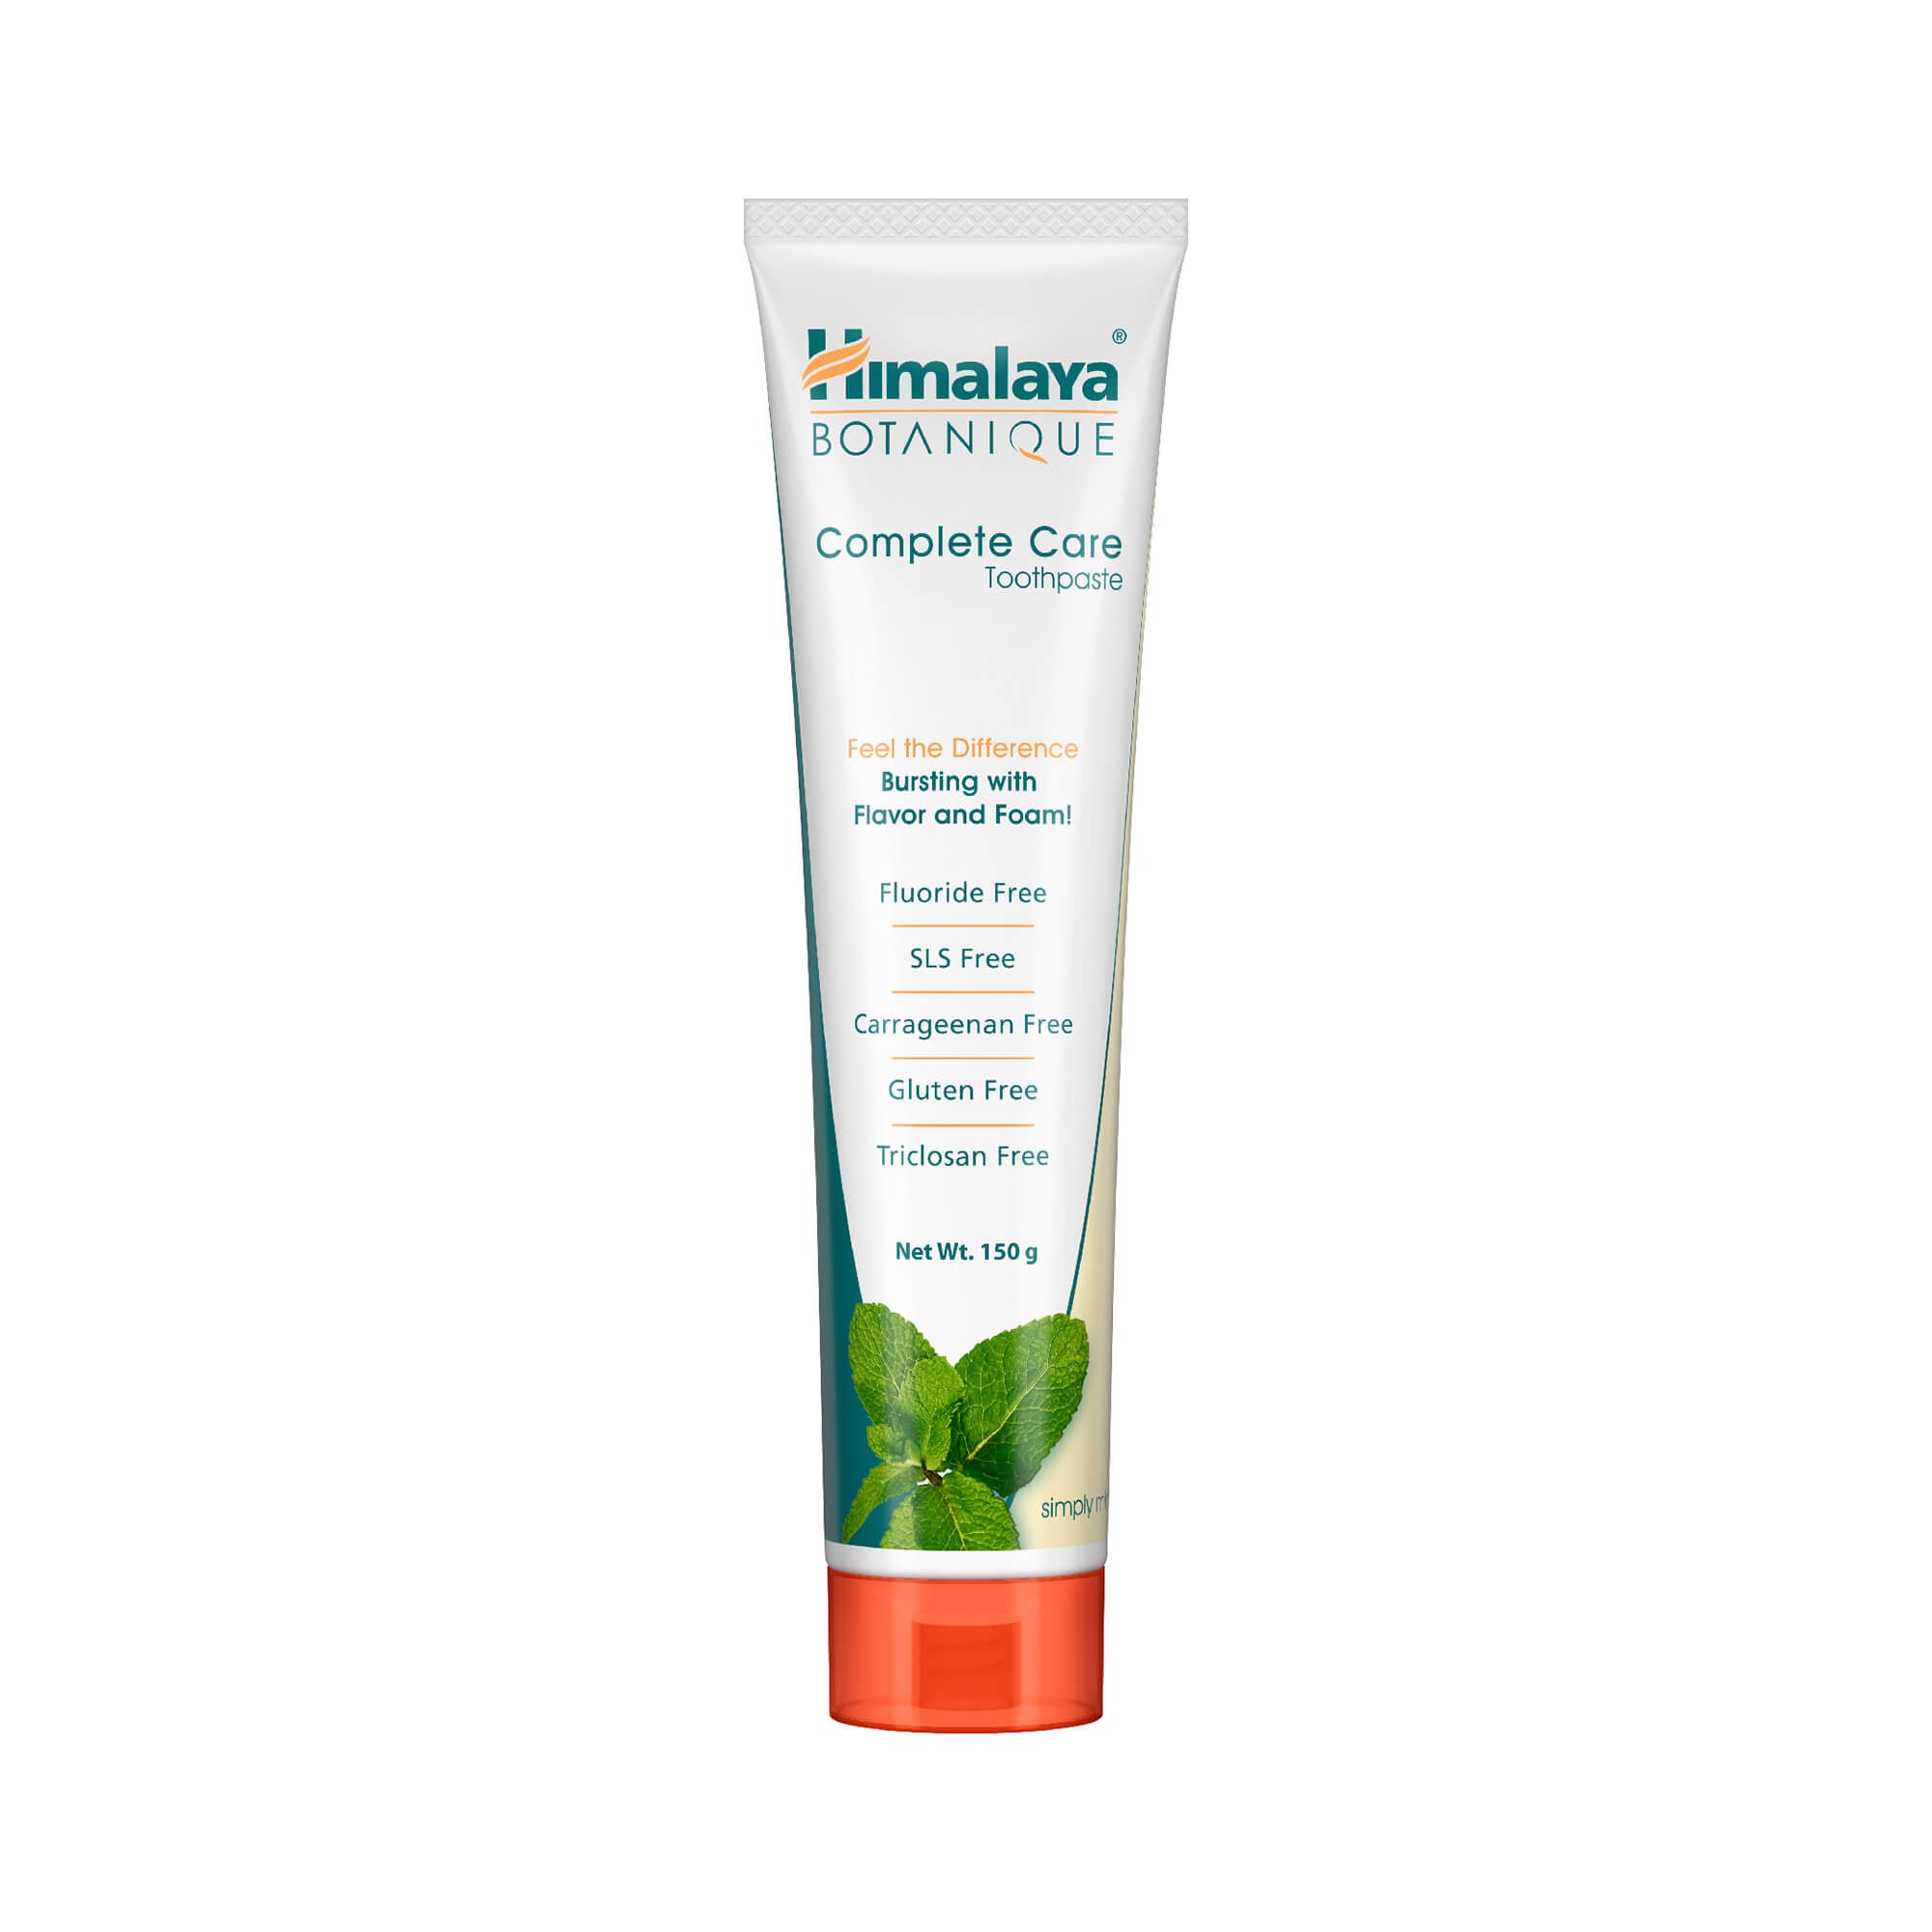 Himalaya BOTANIQUE Complete Care Toothpaste (Simply Mint) 150g